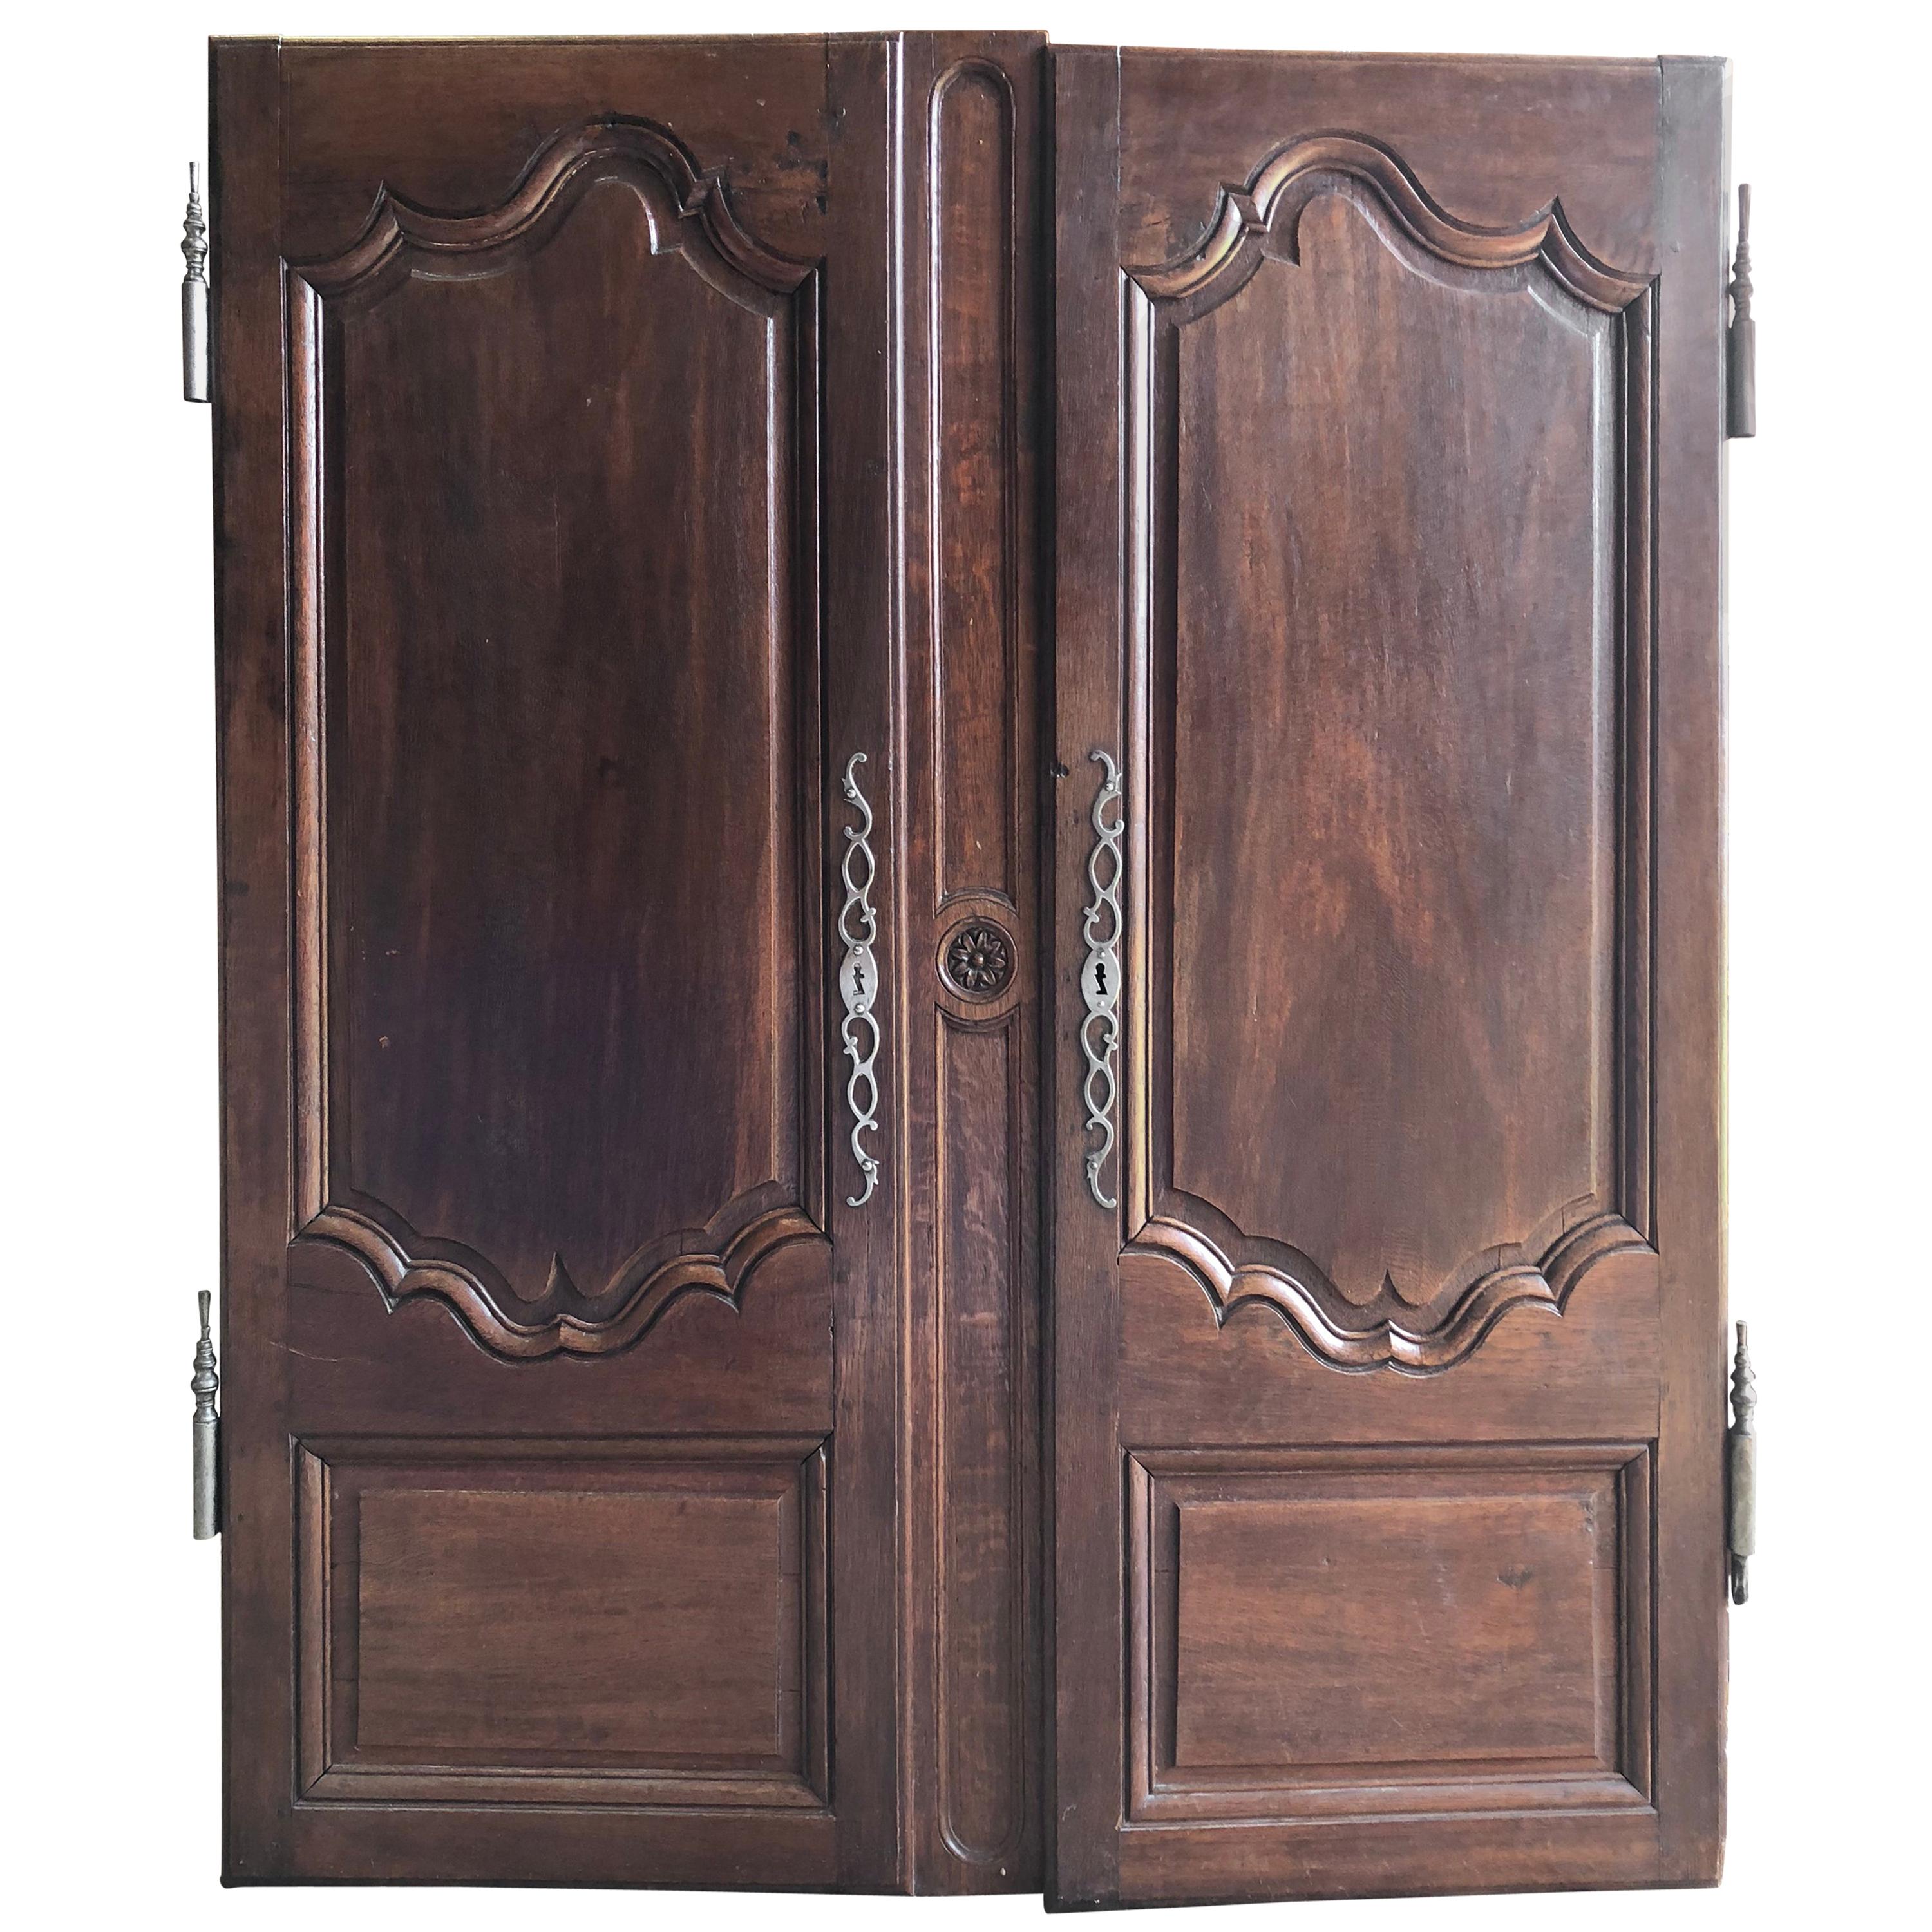 Pair of French Louis XV Armoire Doors